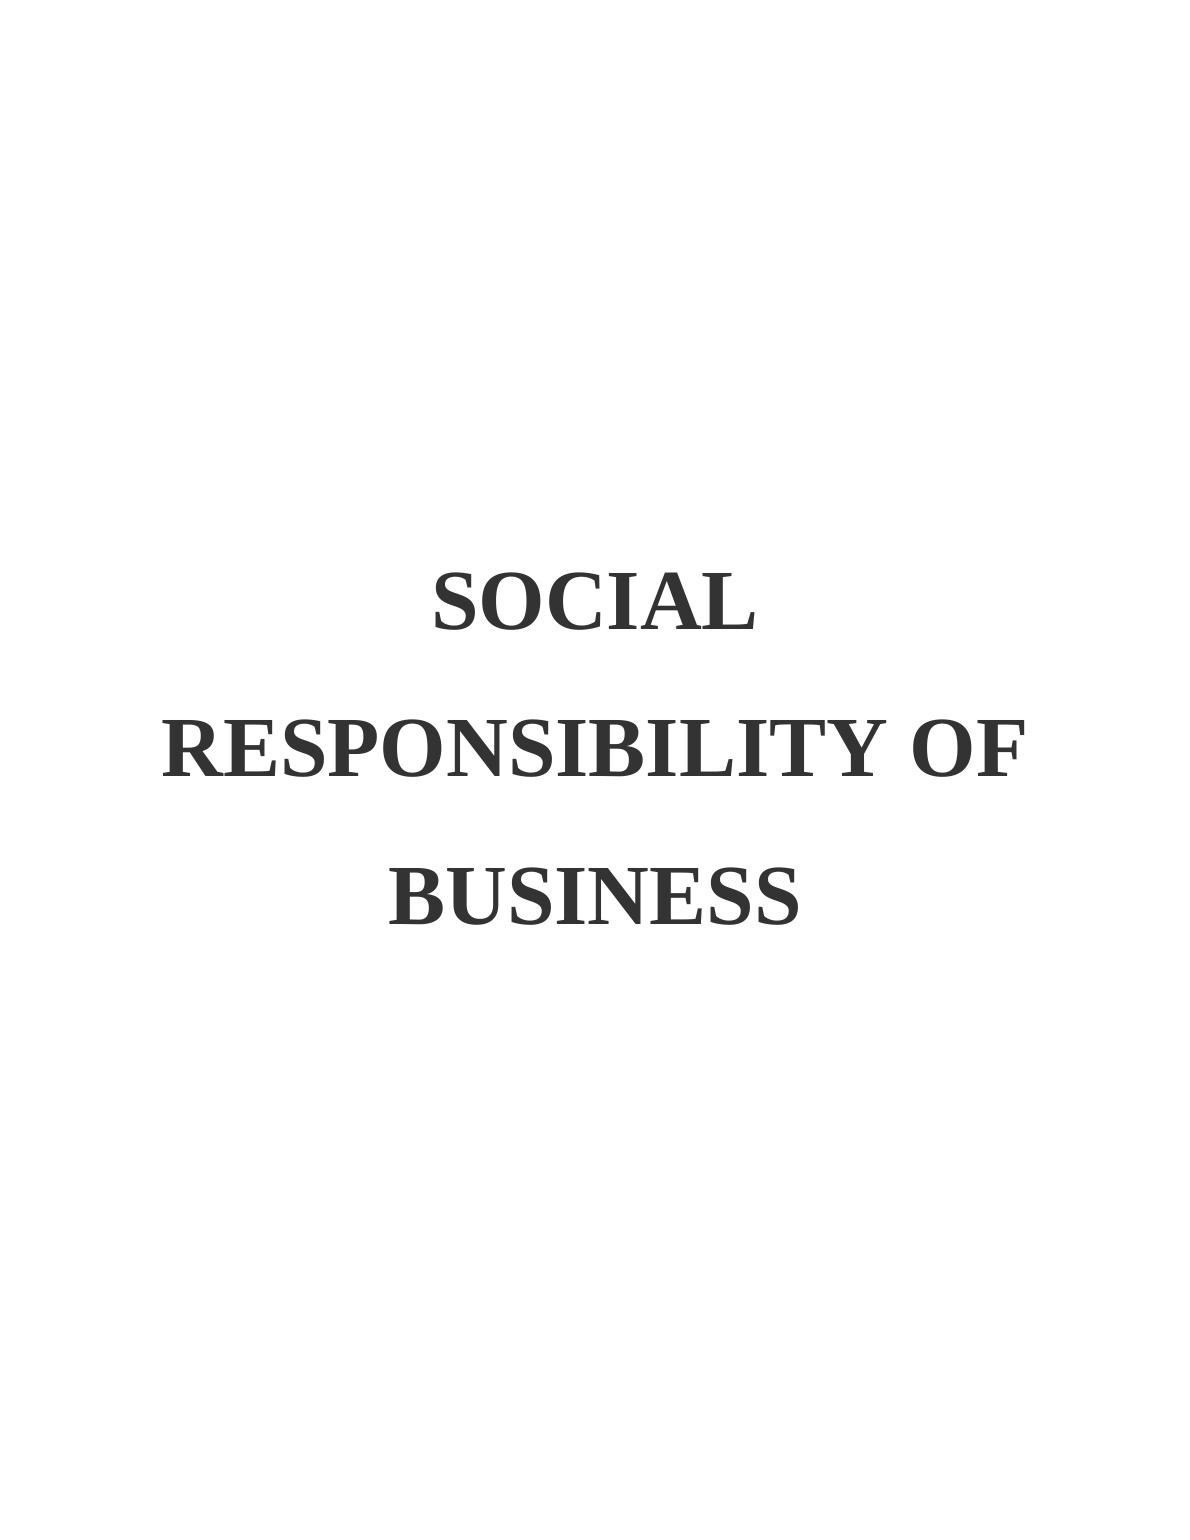 PDF  Social Responsibility Of Business_1